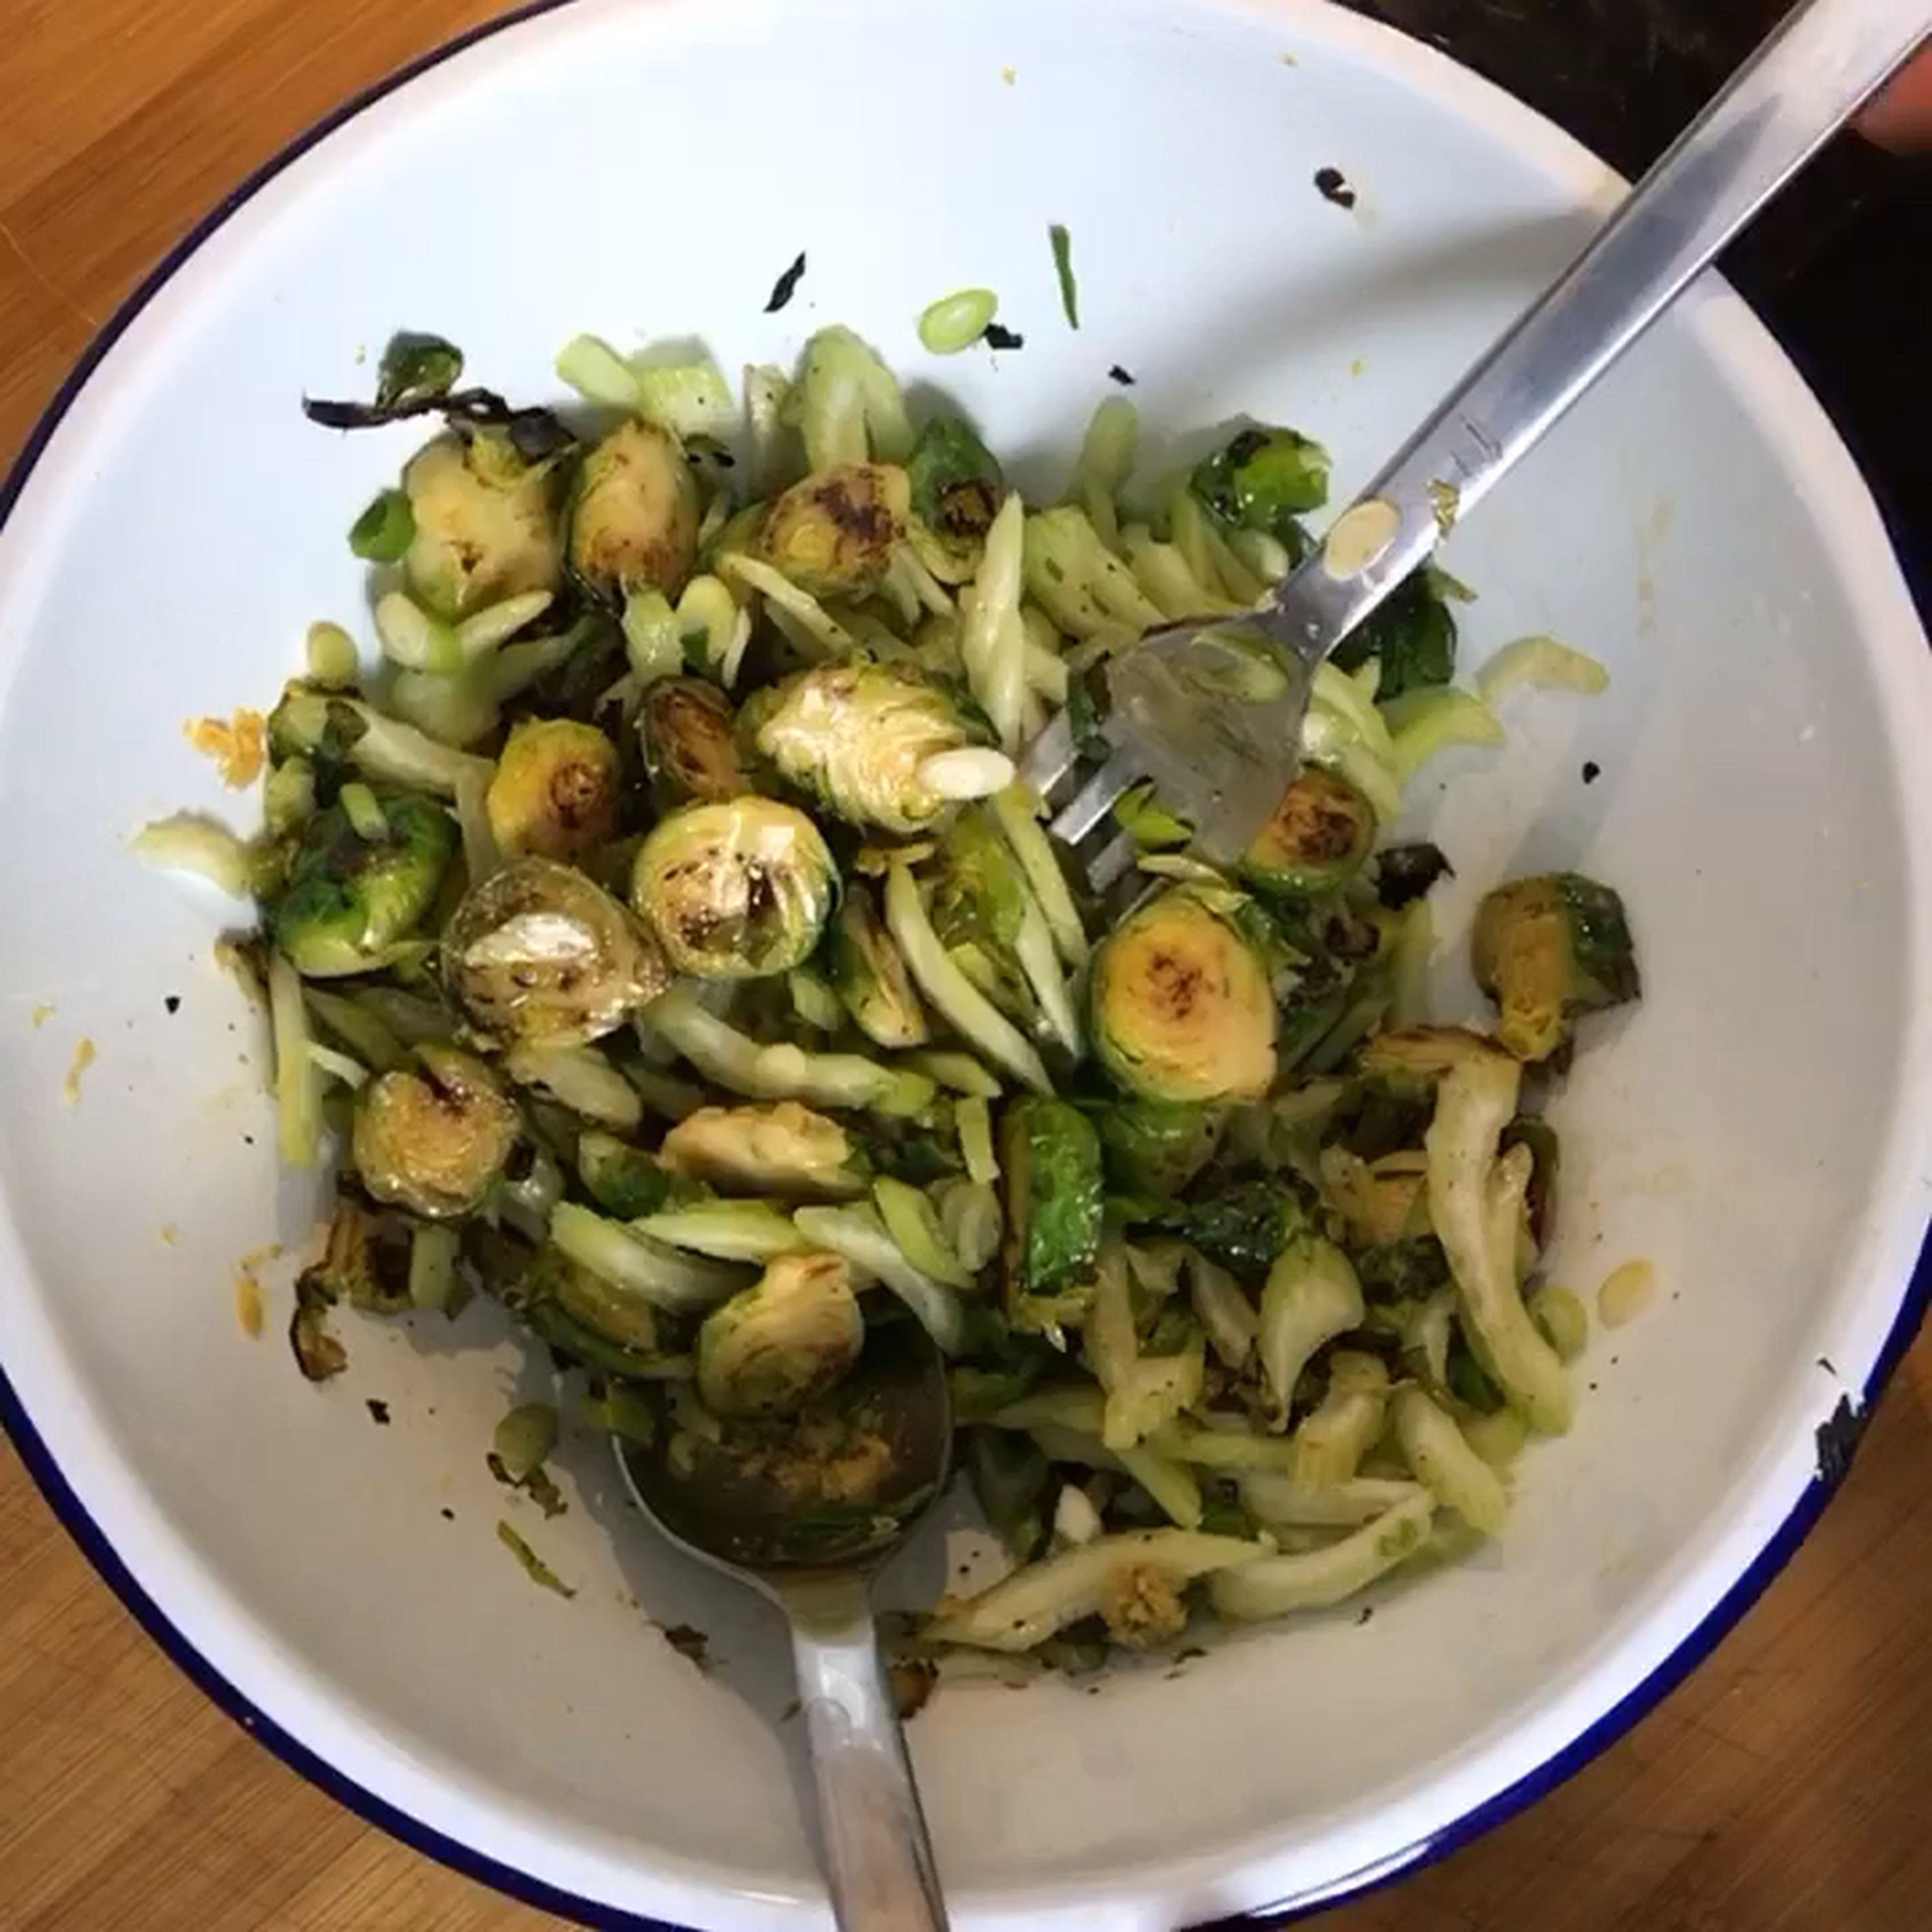 Mix the fried Brussels sprouts in a bowl with celery and spring onions. Then add salt, pepper, lemon zest and juice and mix.